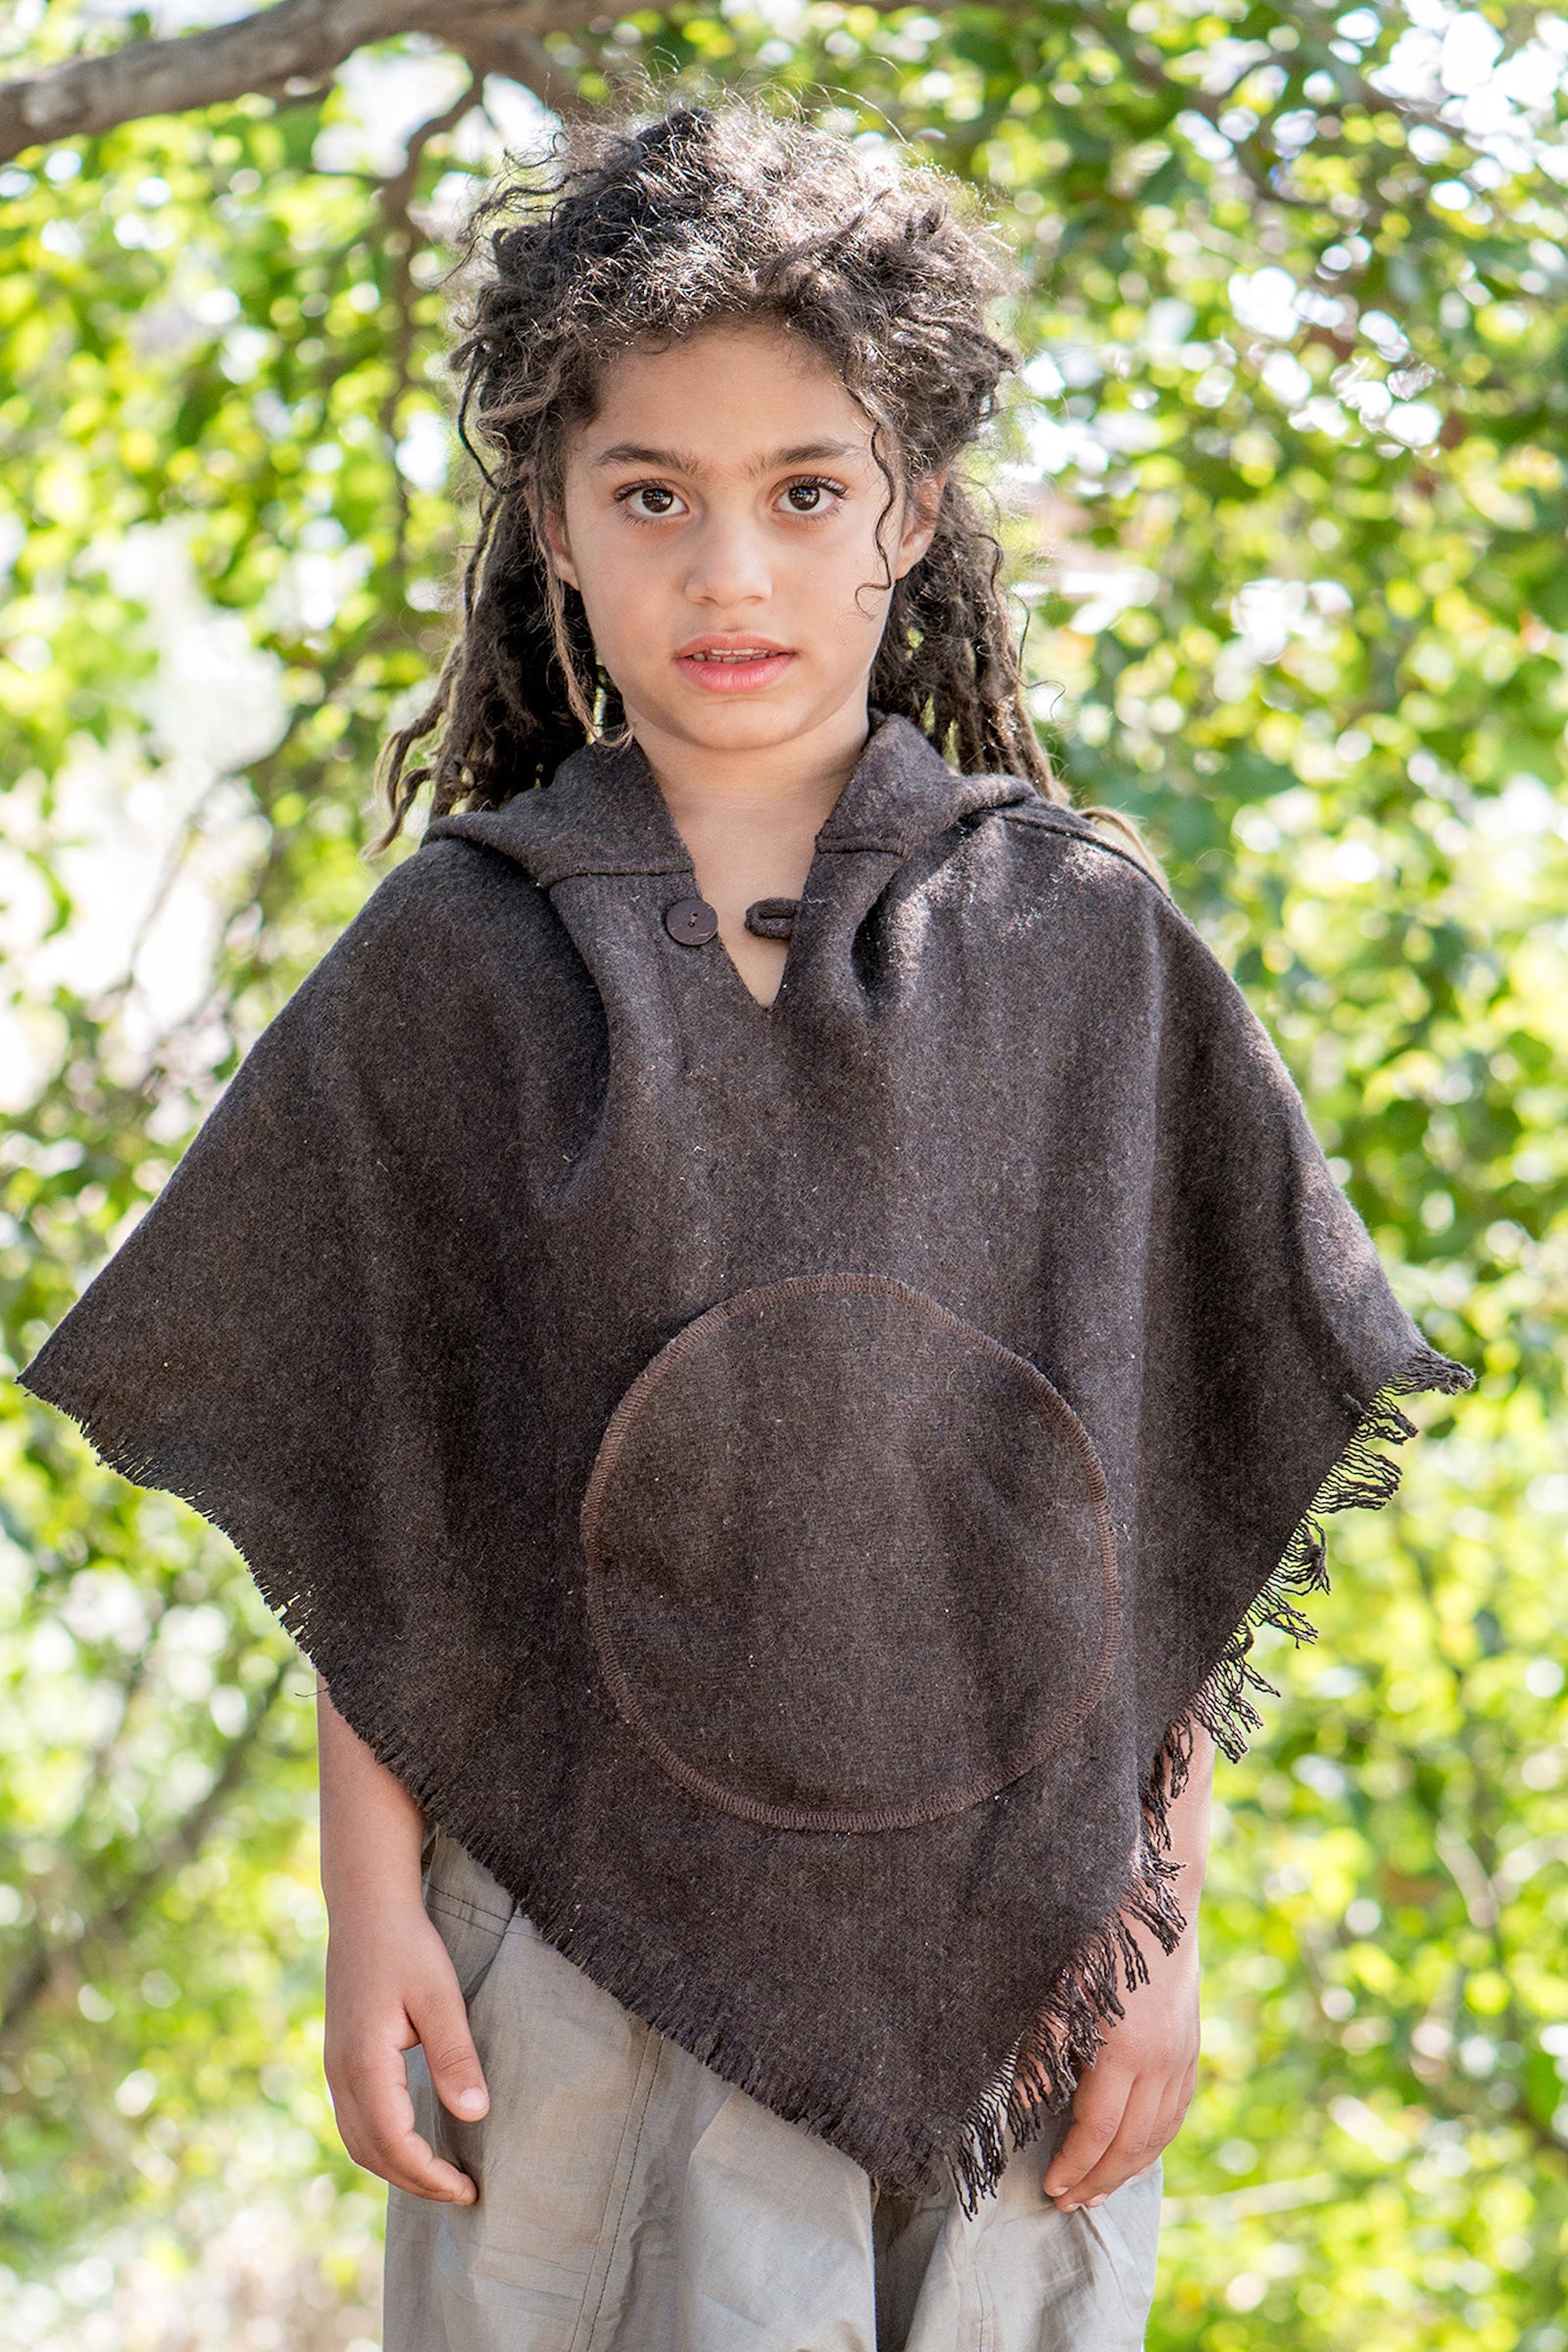 Thick Wool Poncho For Kids ⋙ Pure Handwoven Wool